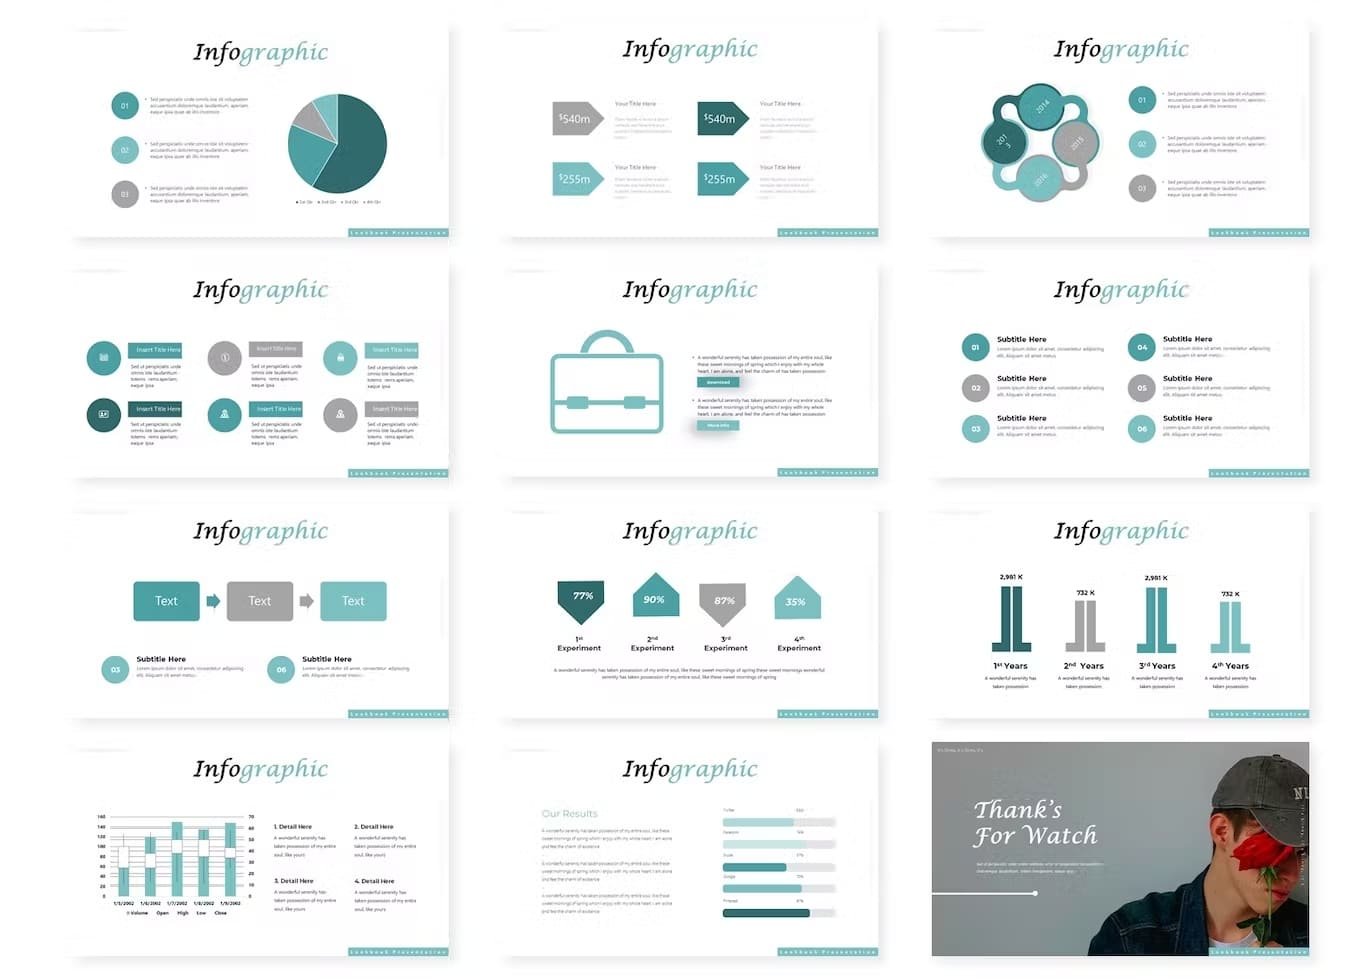 11 slides of infographic and one slide with inscription "Thank's for watch".